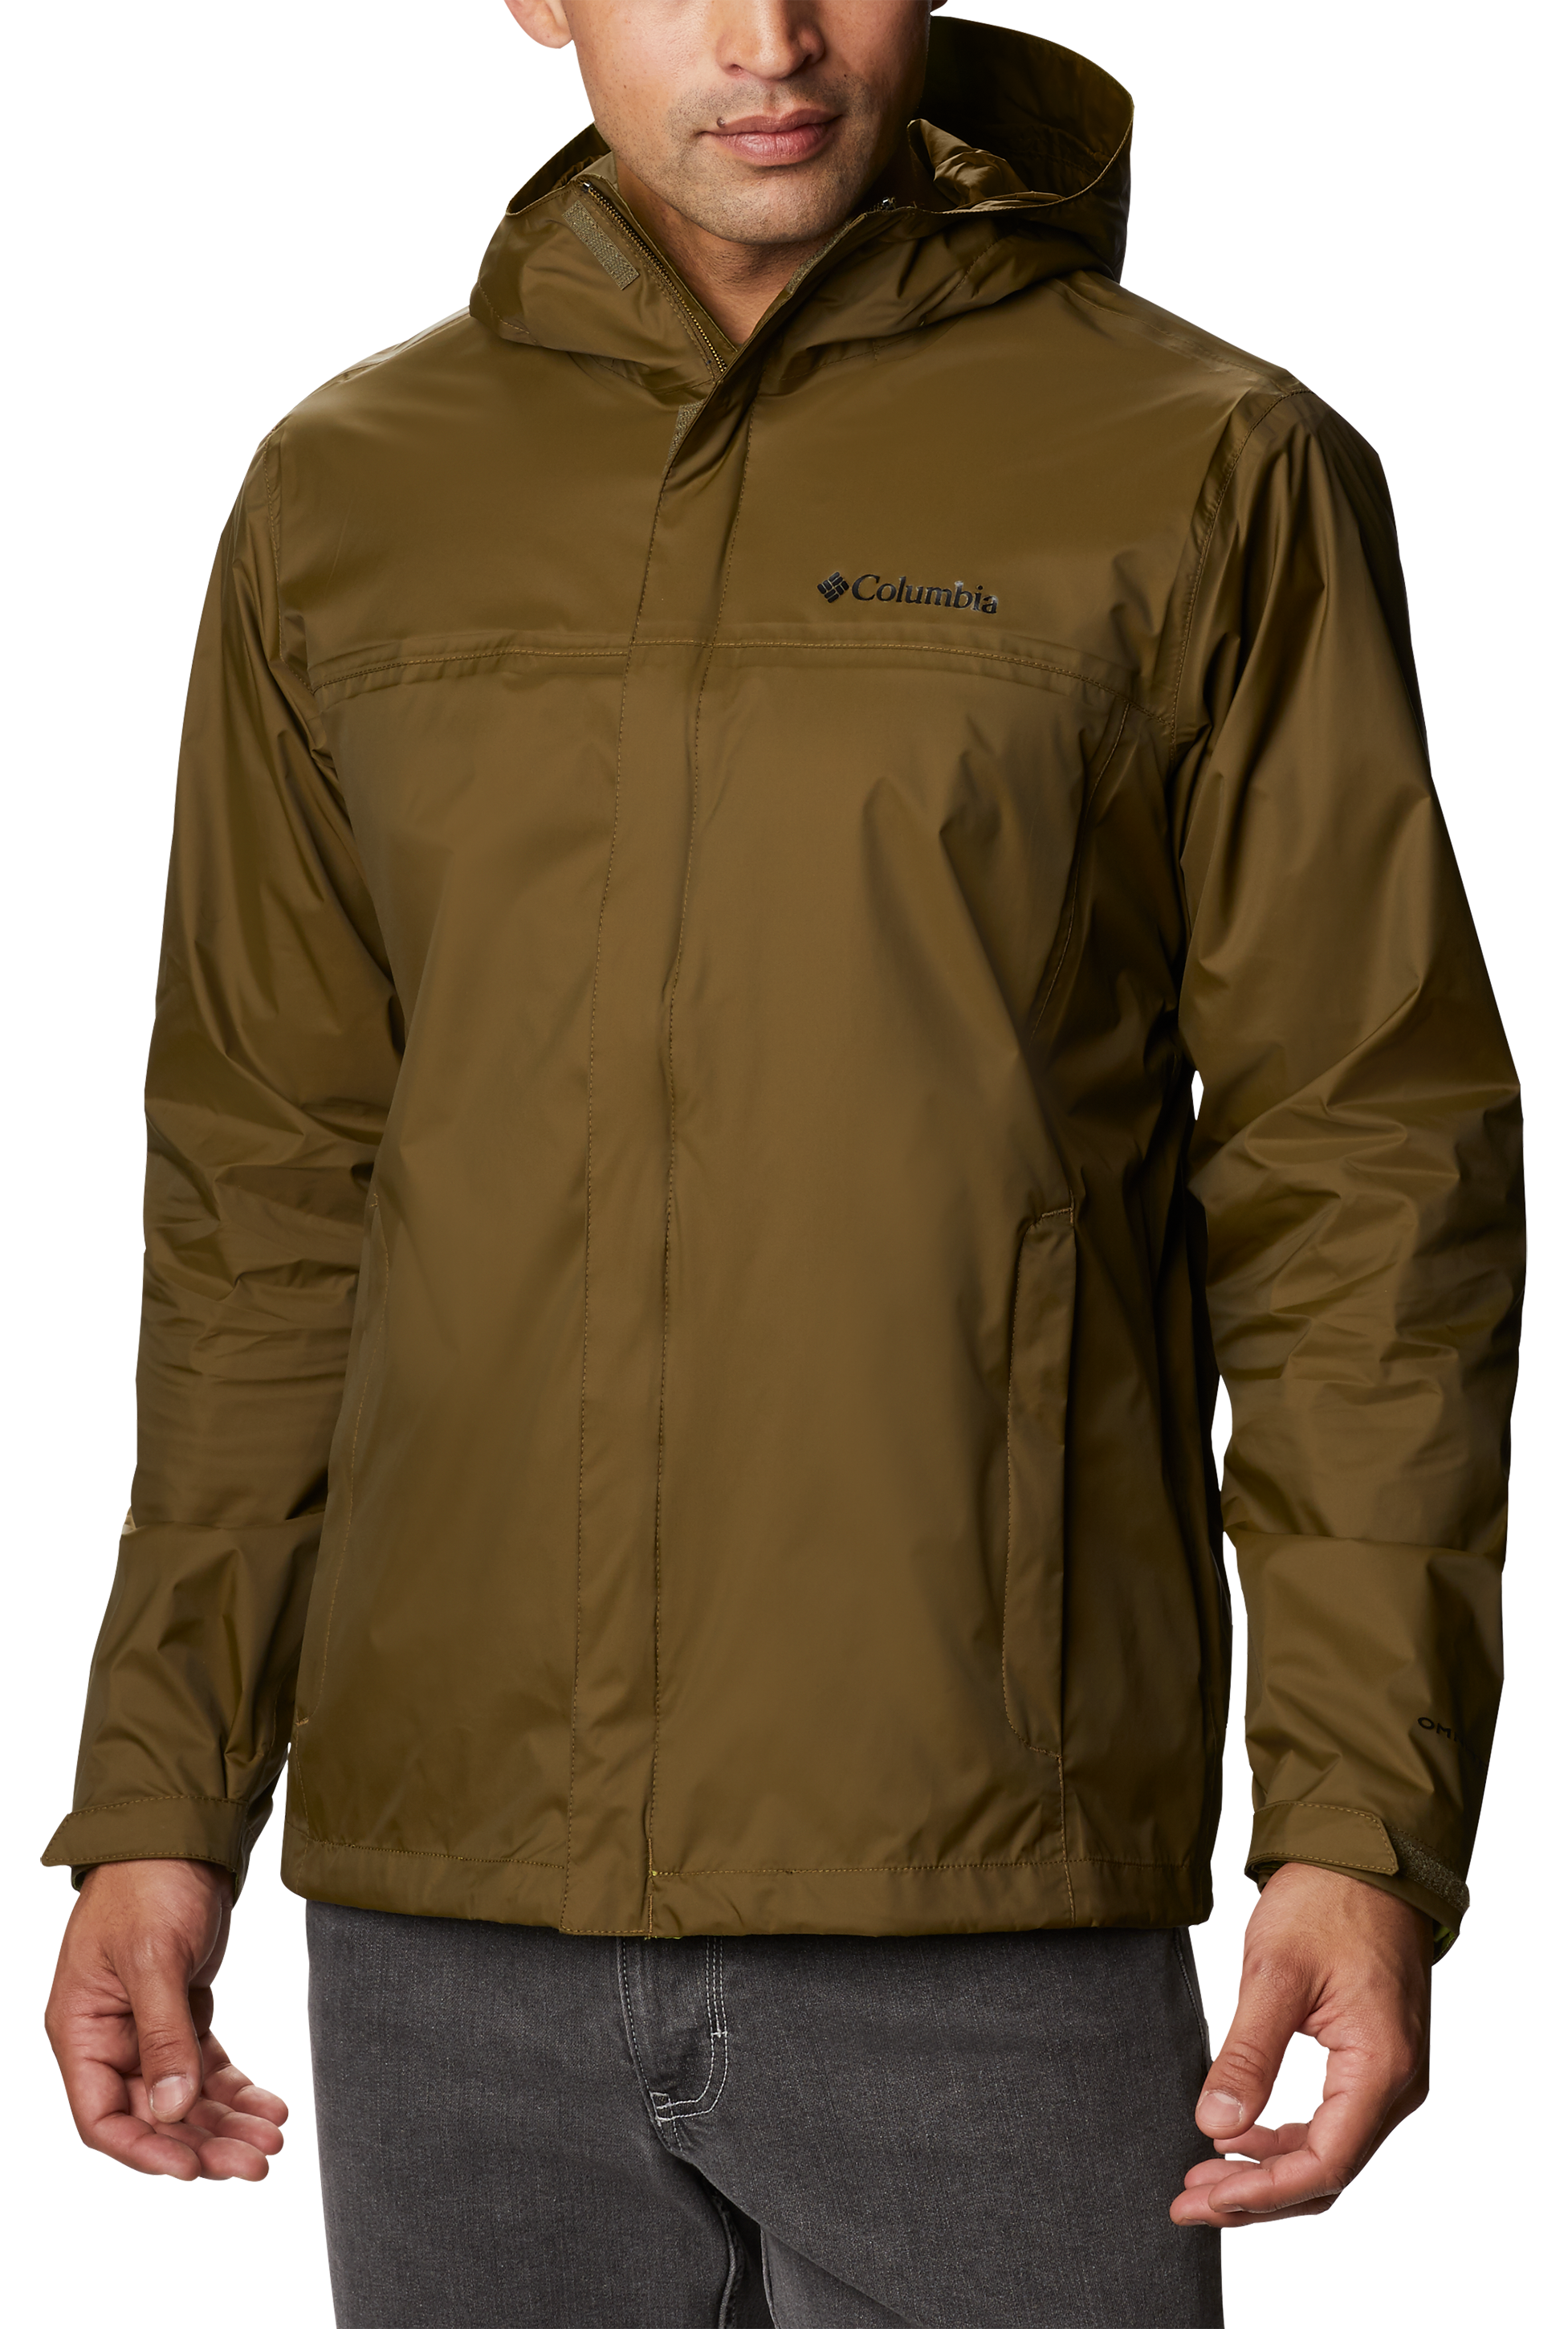 Columbia Watertight II Jacket for Men - New Olive - M